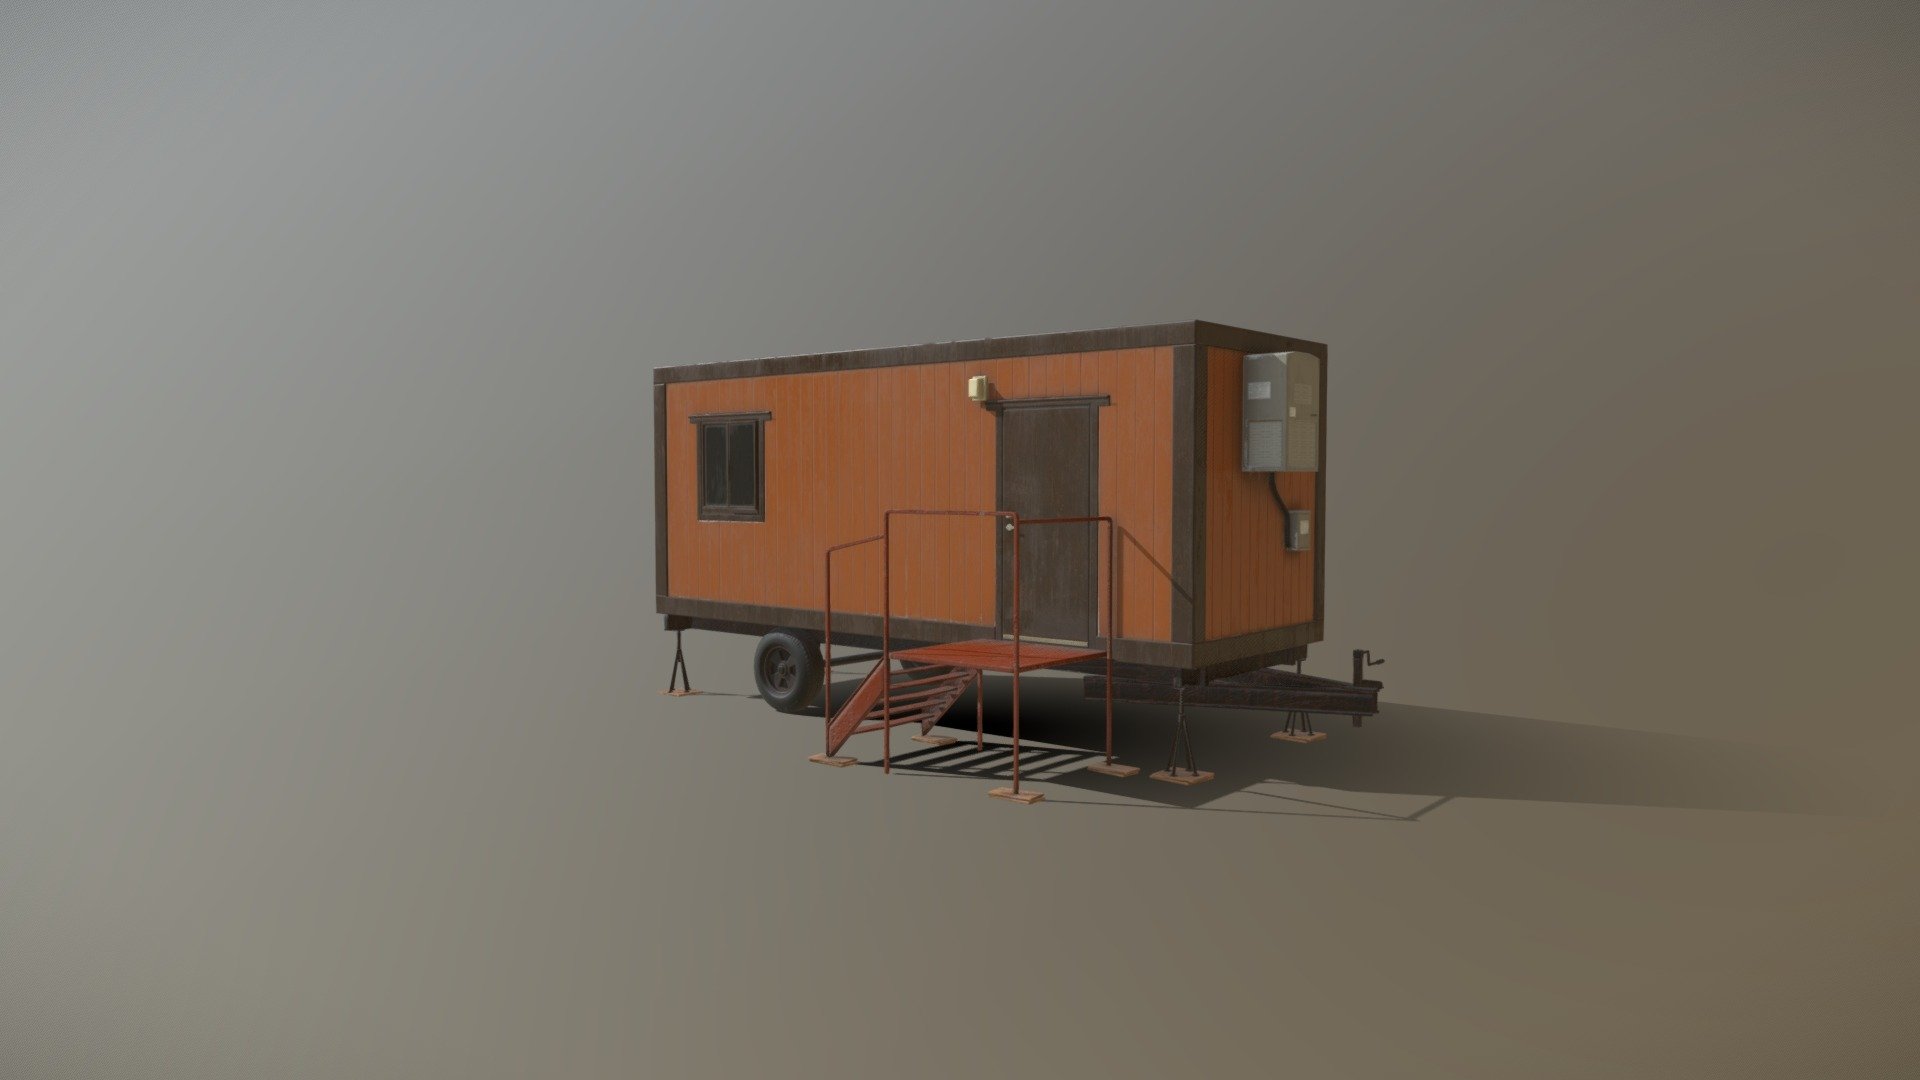 A mobile construction trailer. Great for all your portable office needs. Mobile office trailers are the perfect solution for any company with remote or temporary onsite work locations. Use this real-time asset in any of your construction scenes. The model is built to real world scales 3d model